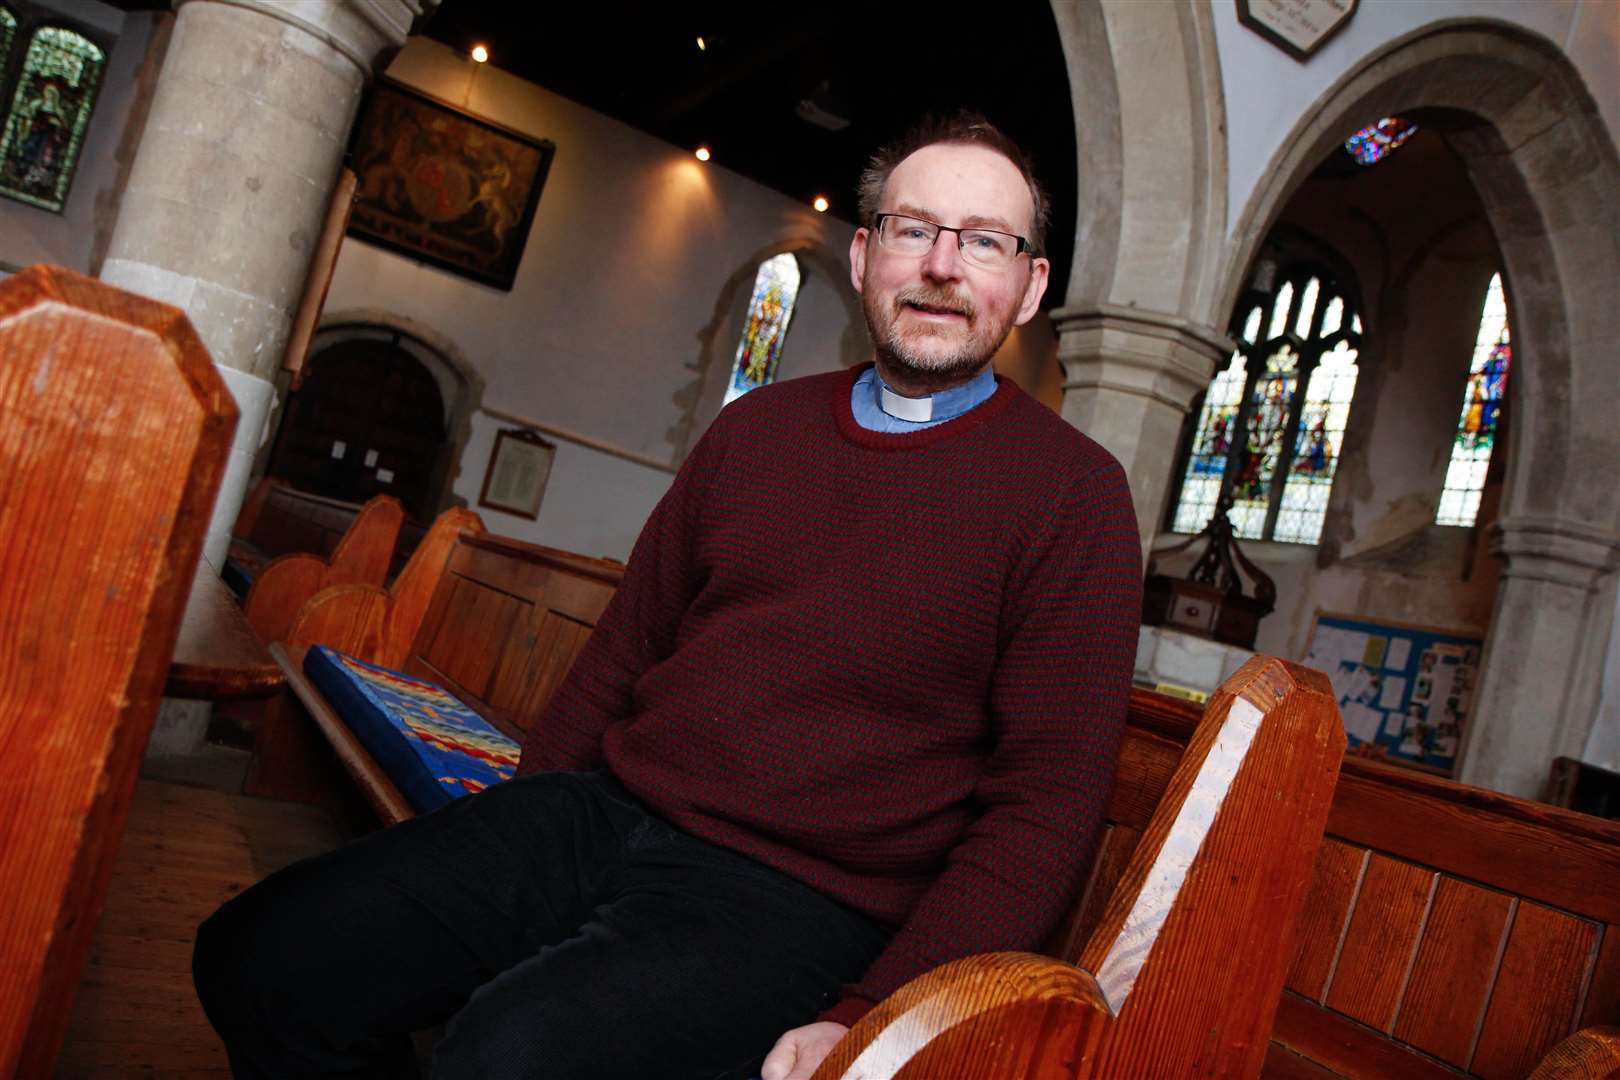 Event: The Abbey is selling off pews to make room for other activitiesLocation: Minster Abbey, Chapel Street, MinsterCaption: Rev Tim Hall with the pewsPictures: Darren Small FM2893993 (3584042)